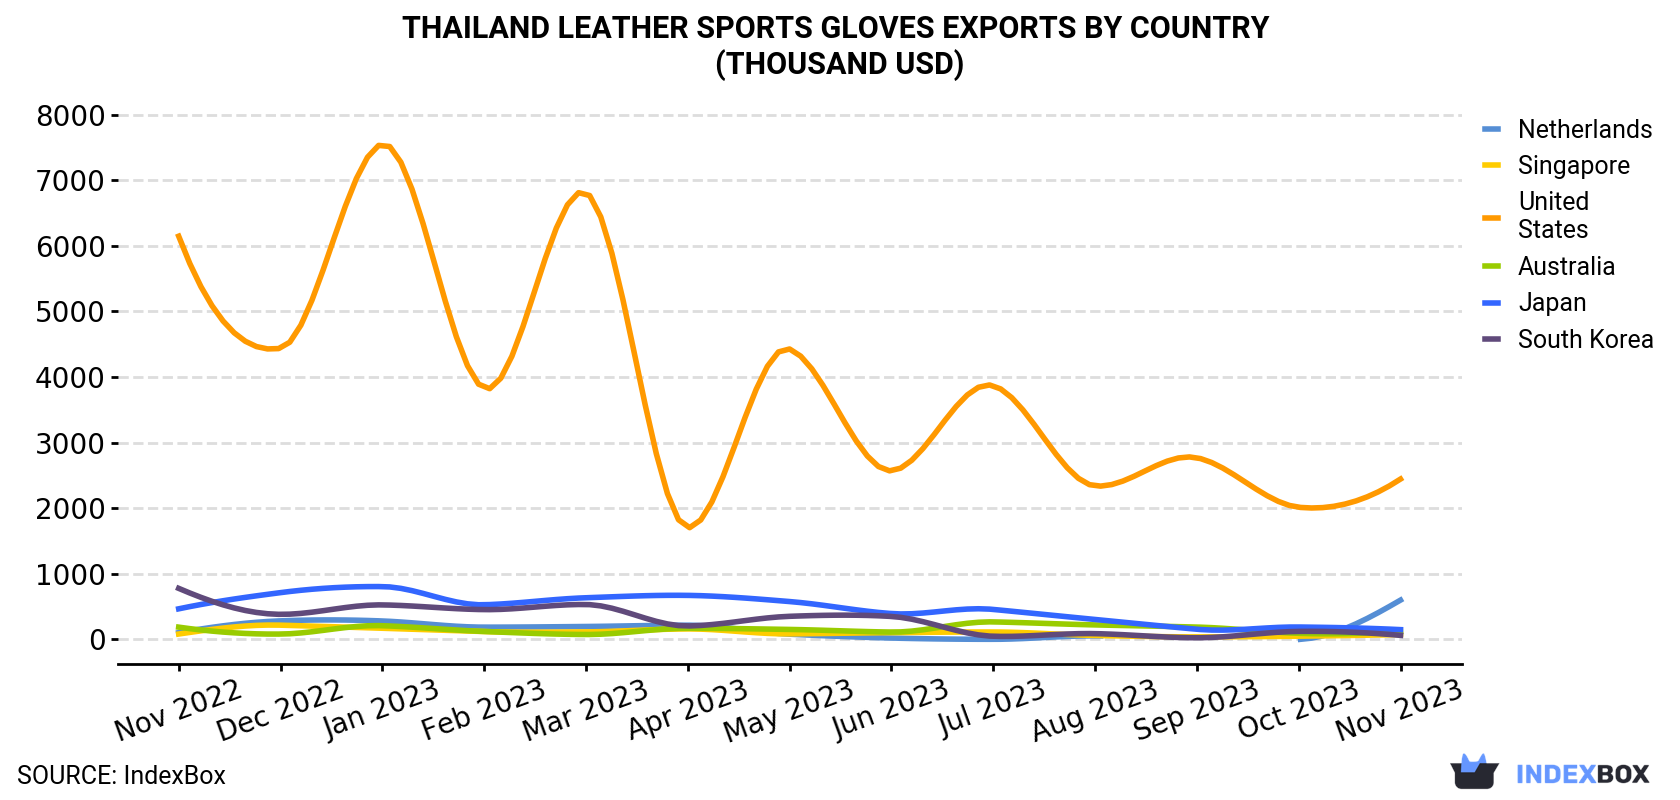 Thailand Leather Sports Gloves Exports By Country (Thousand USD)